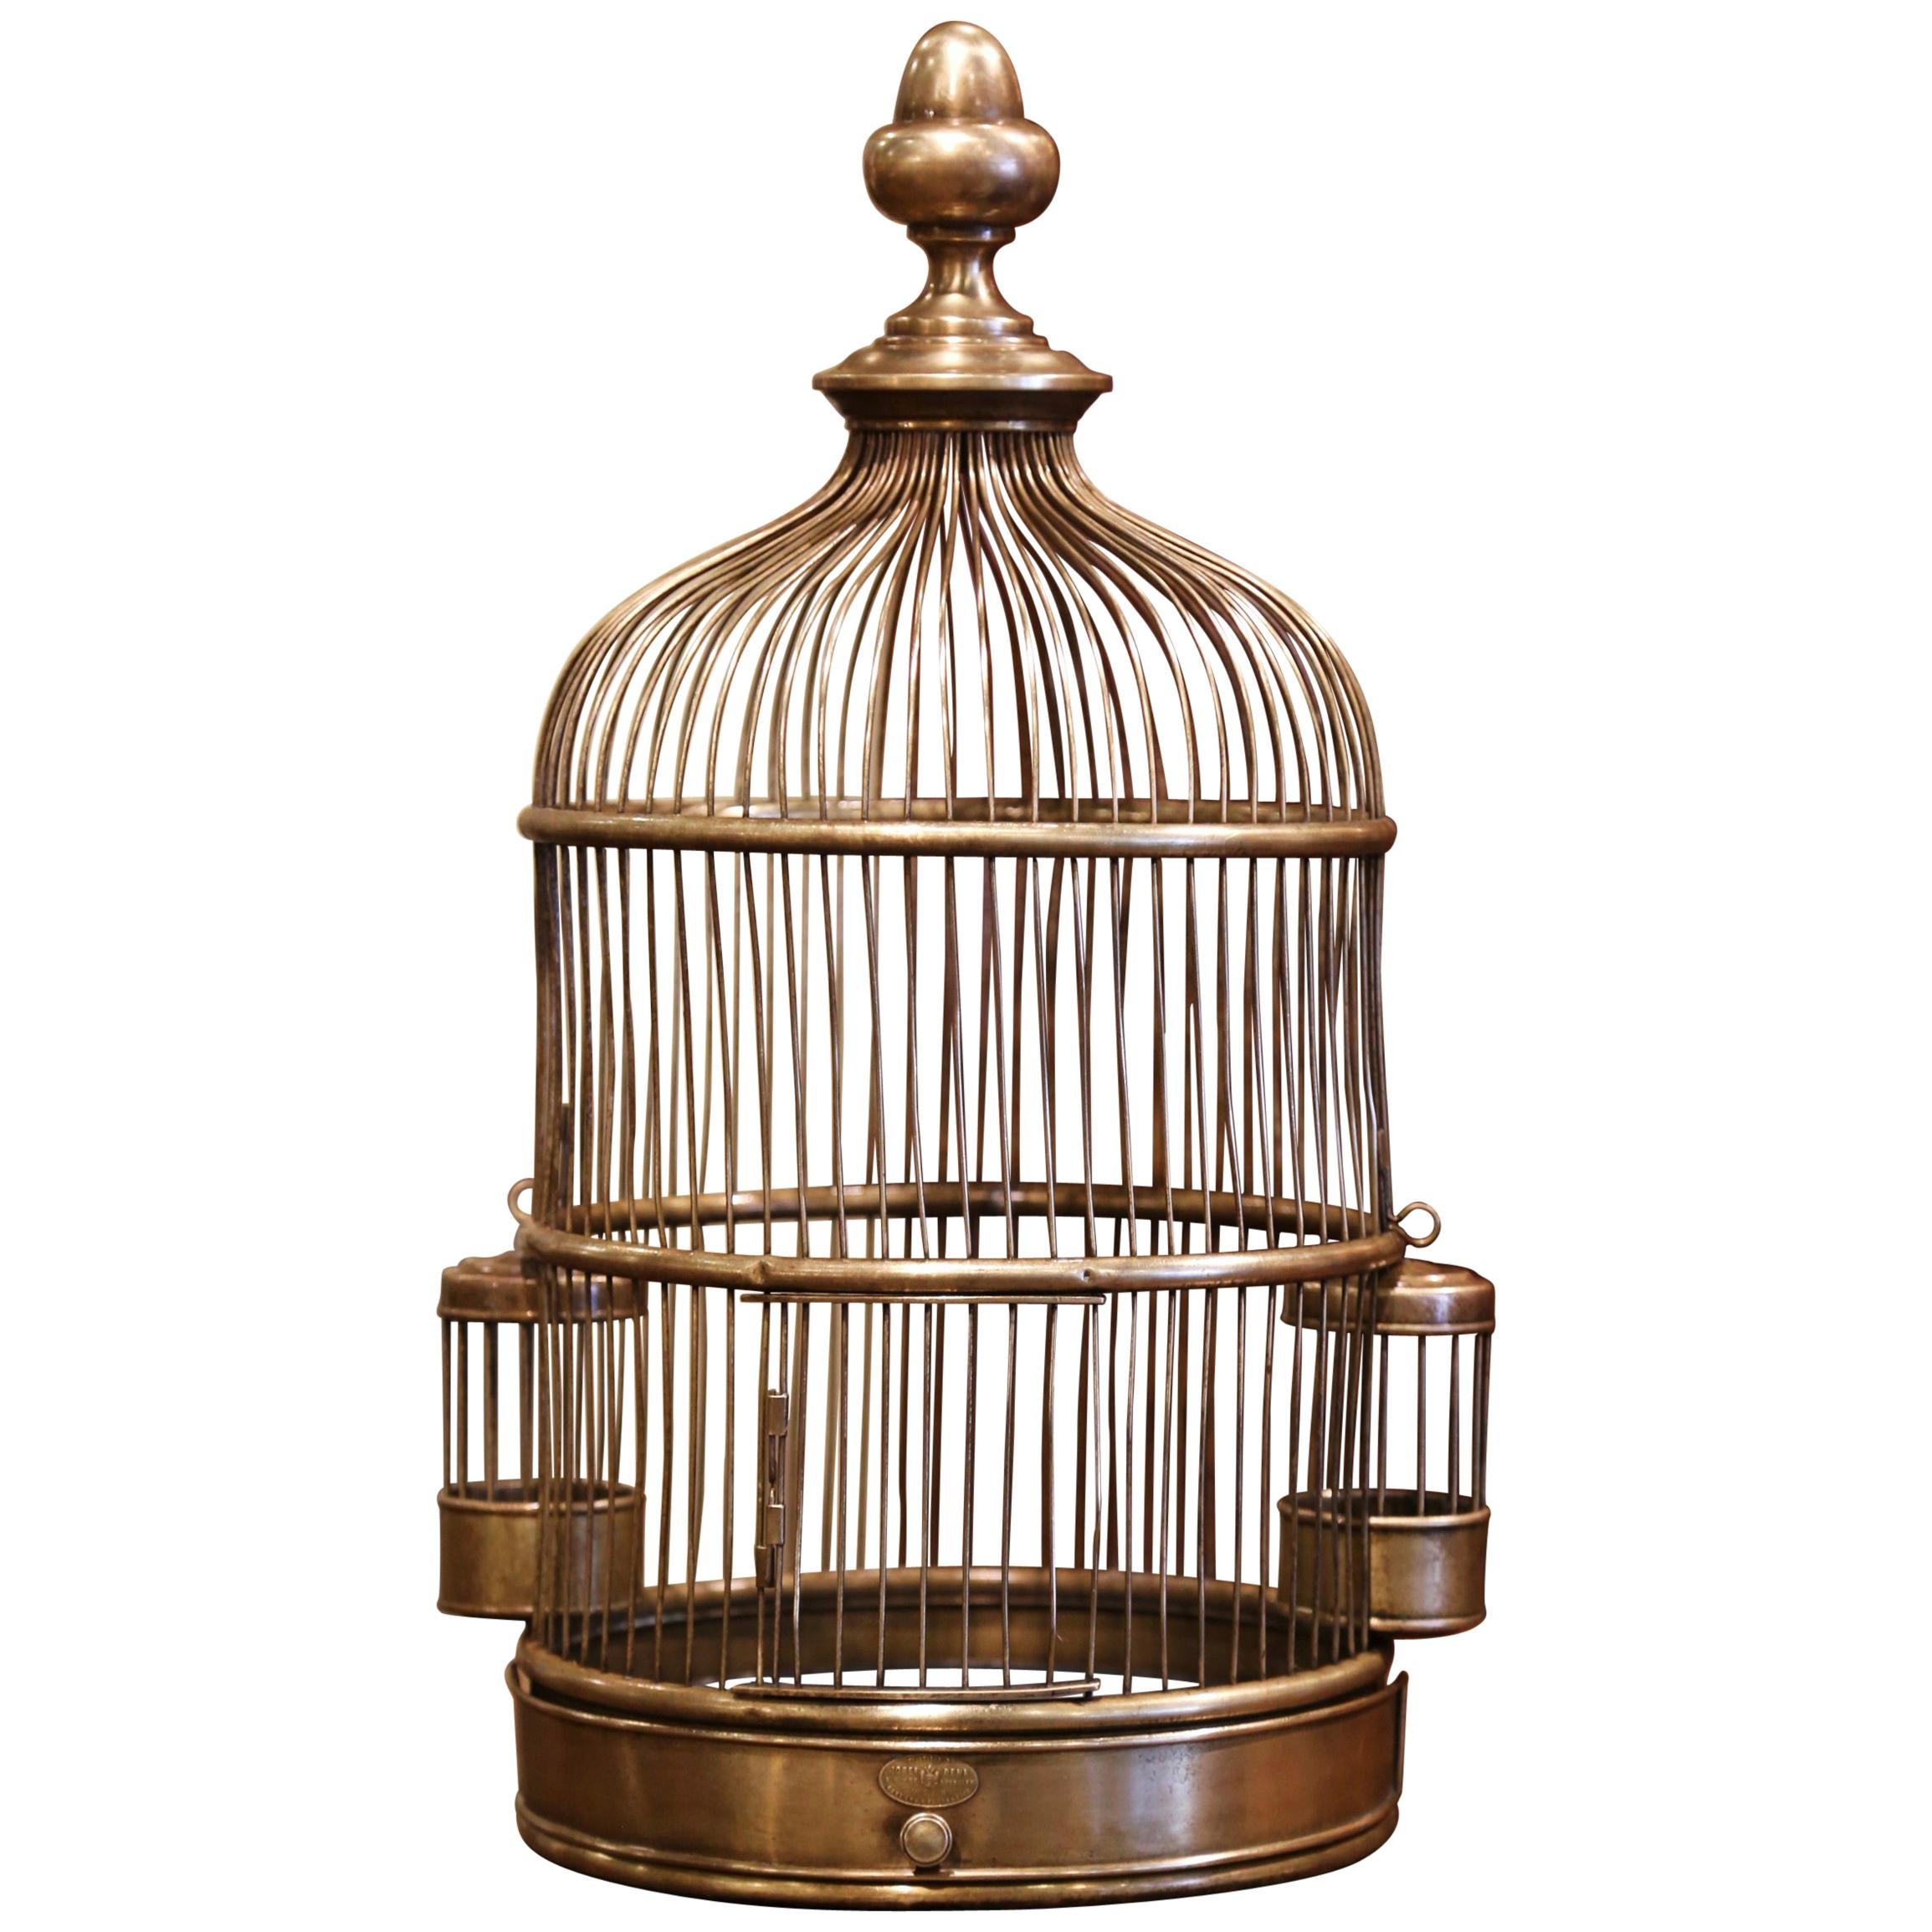 Early 20th Century French Napoleon III Brass Birdcage with Zinc Removable Tray